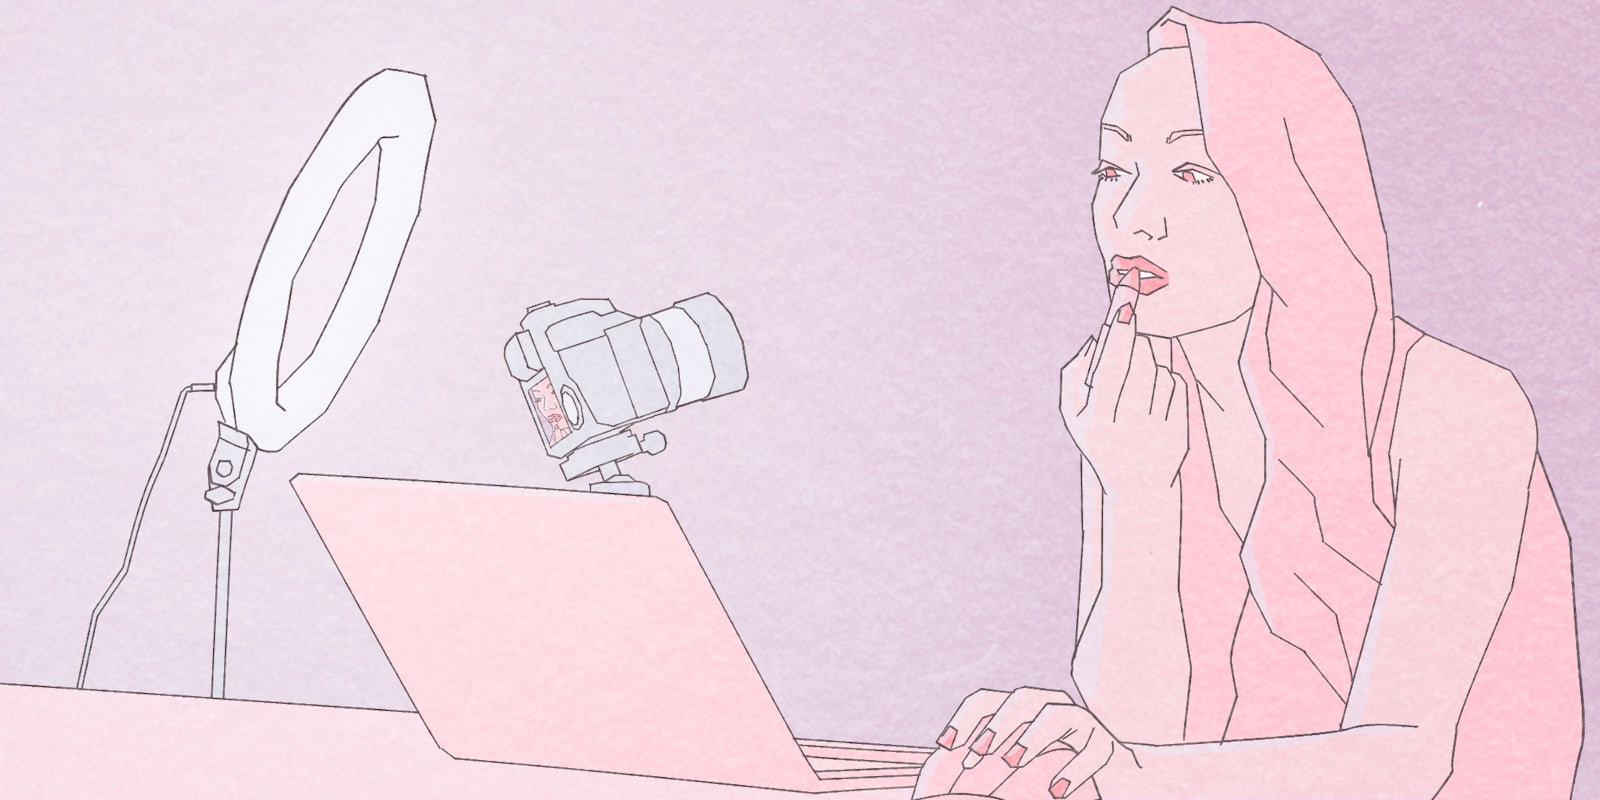 illustration of woman using ring light, camera and laptop to apply lipstick